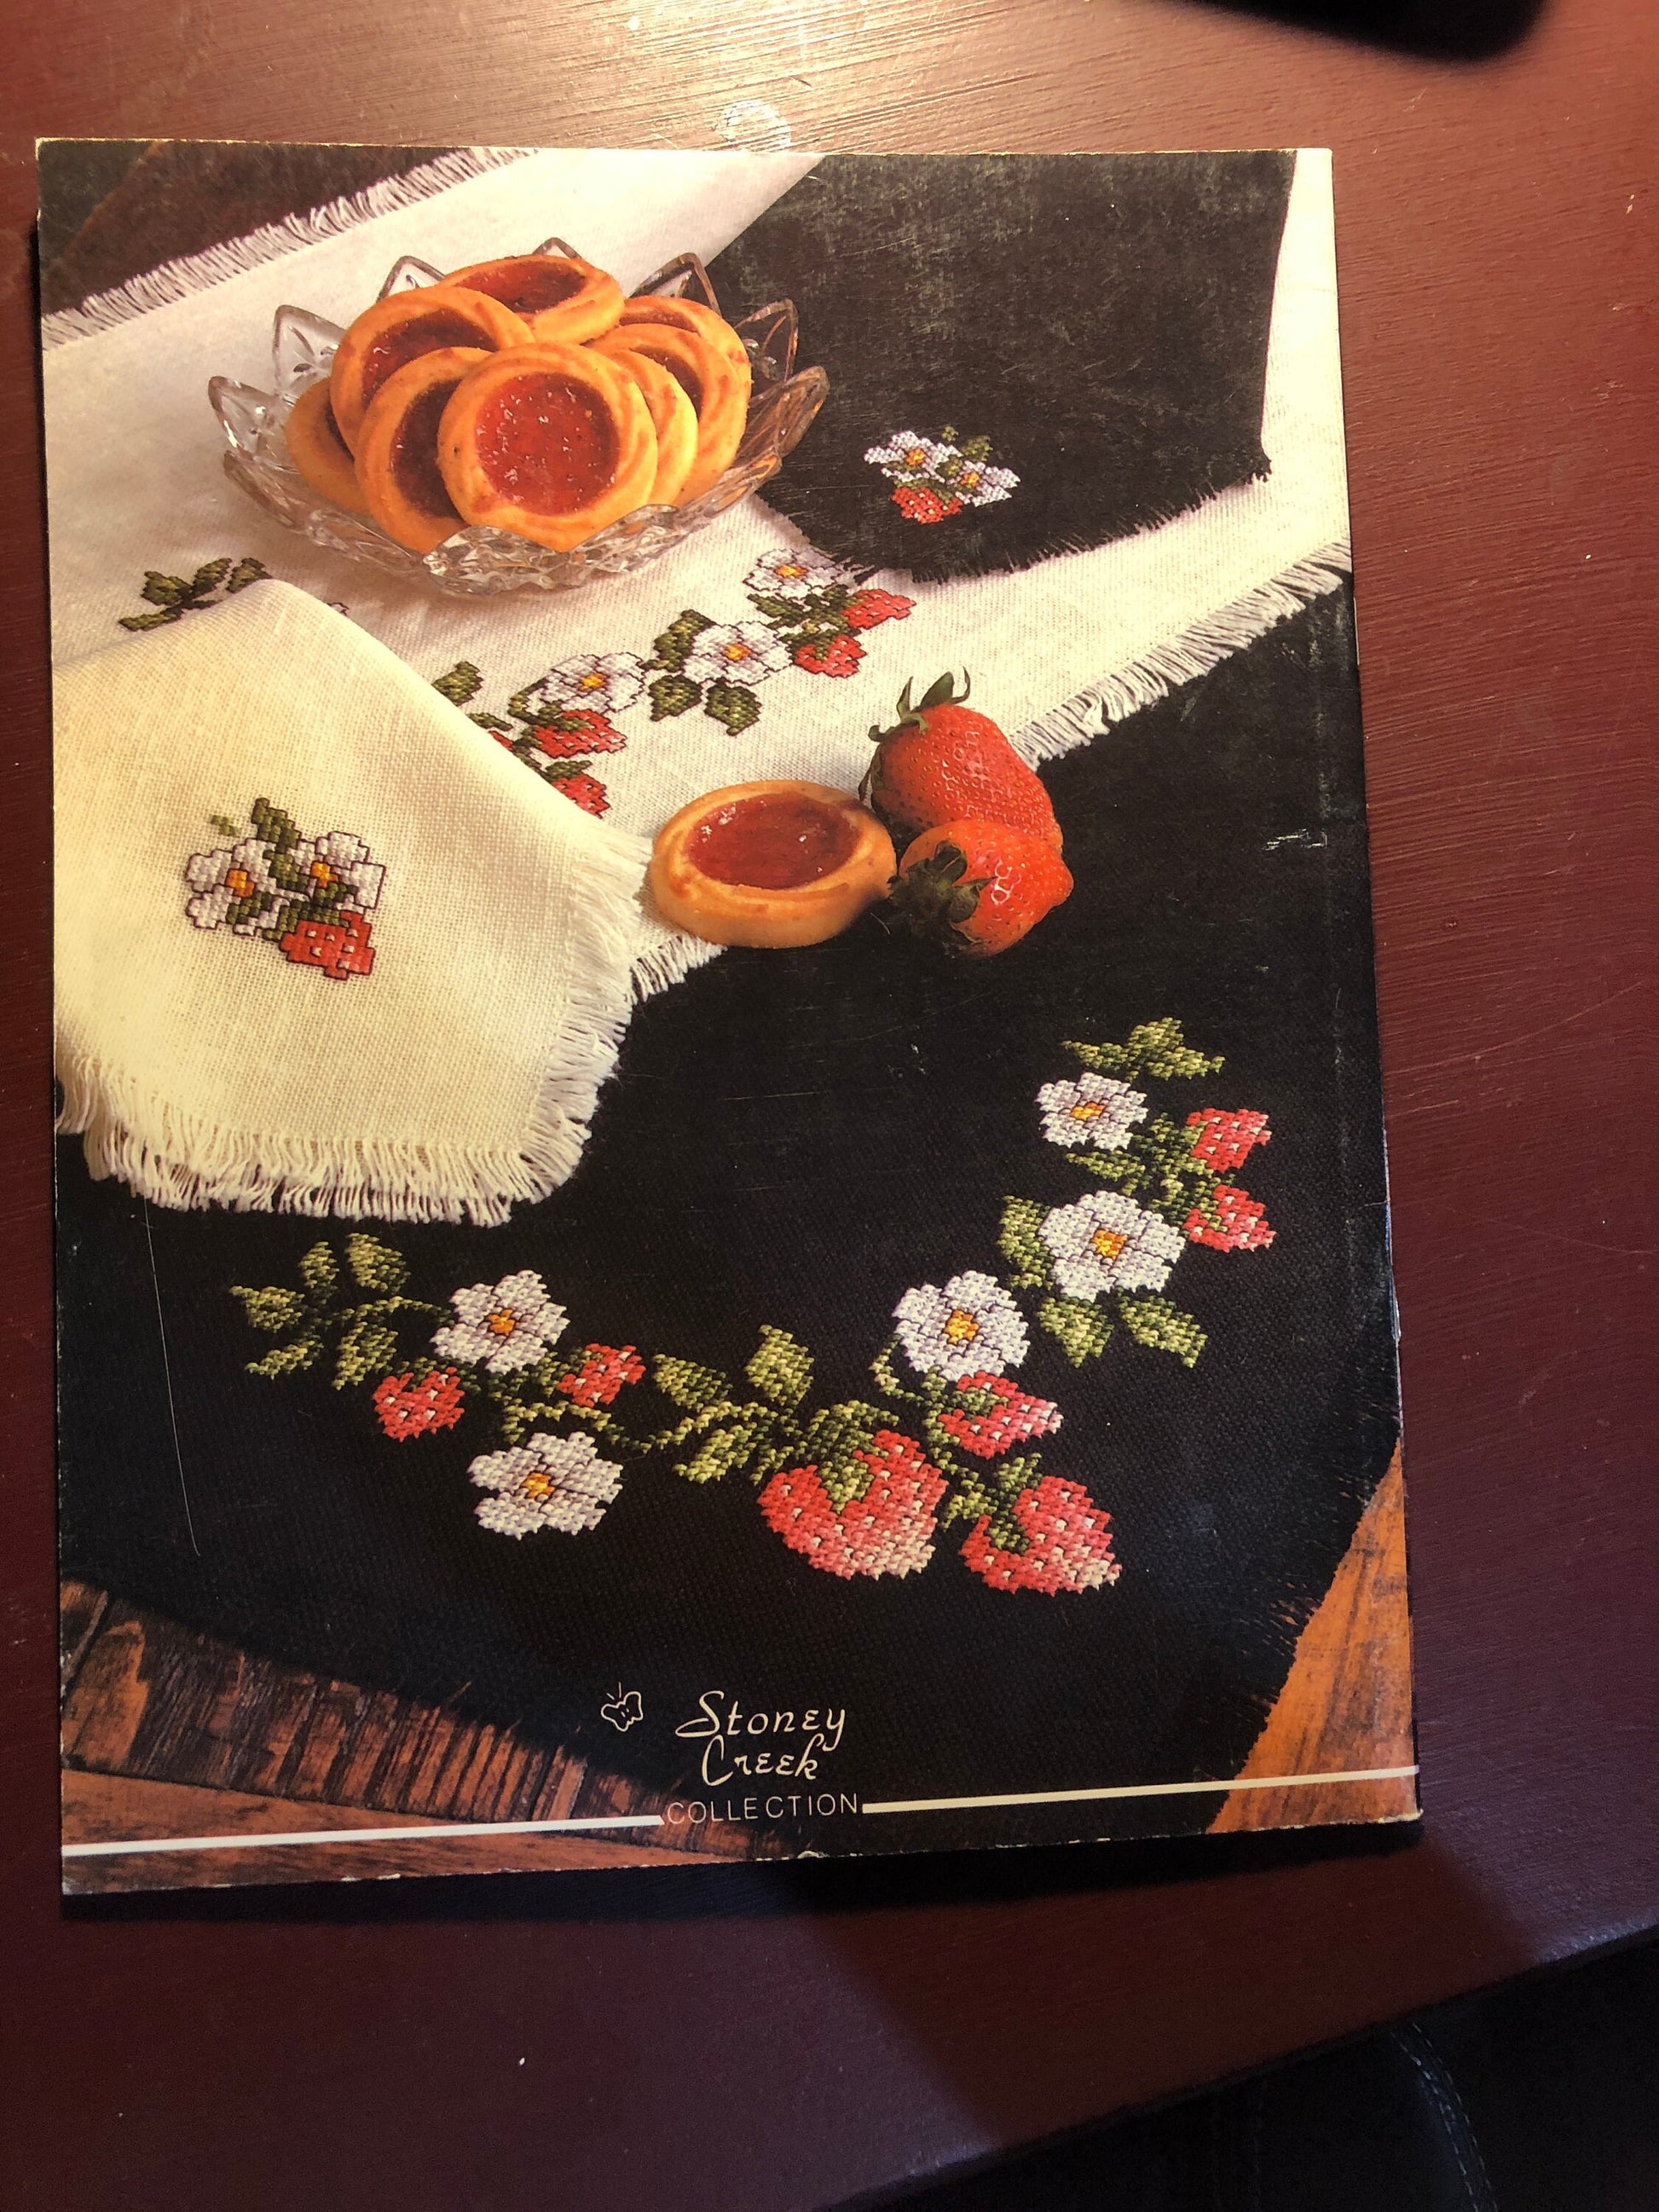 Stony Creek, Table Elegance, Vintage 1987, Book 40, Counted Cross Stitch Pattern